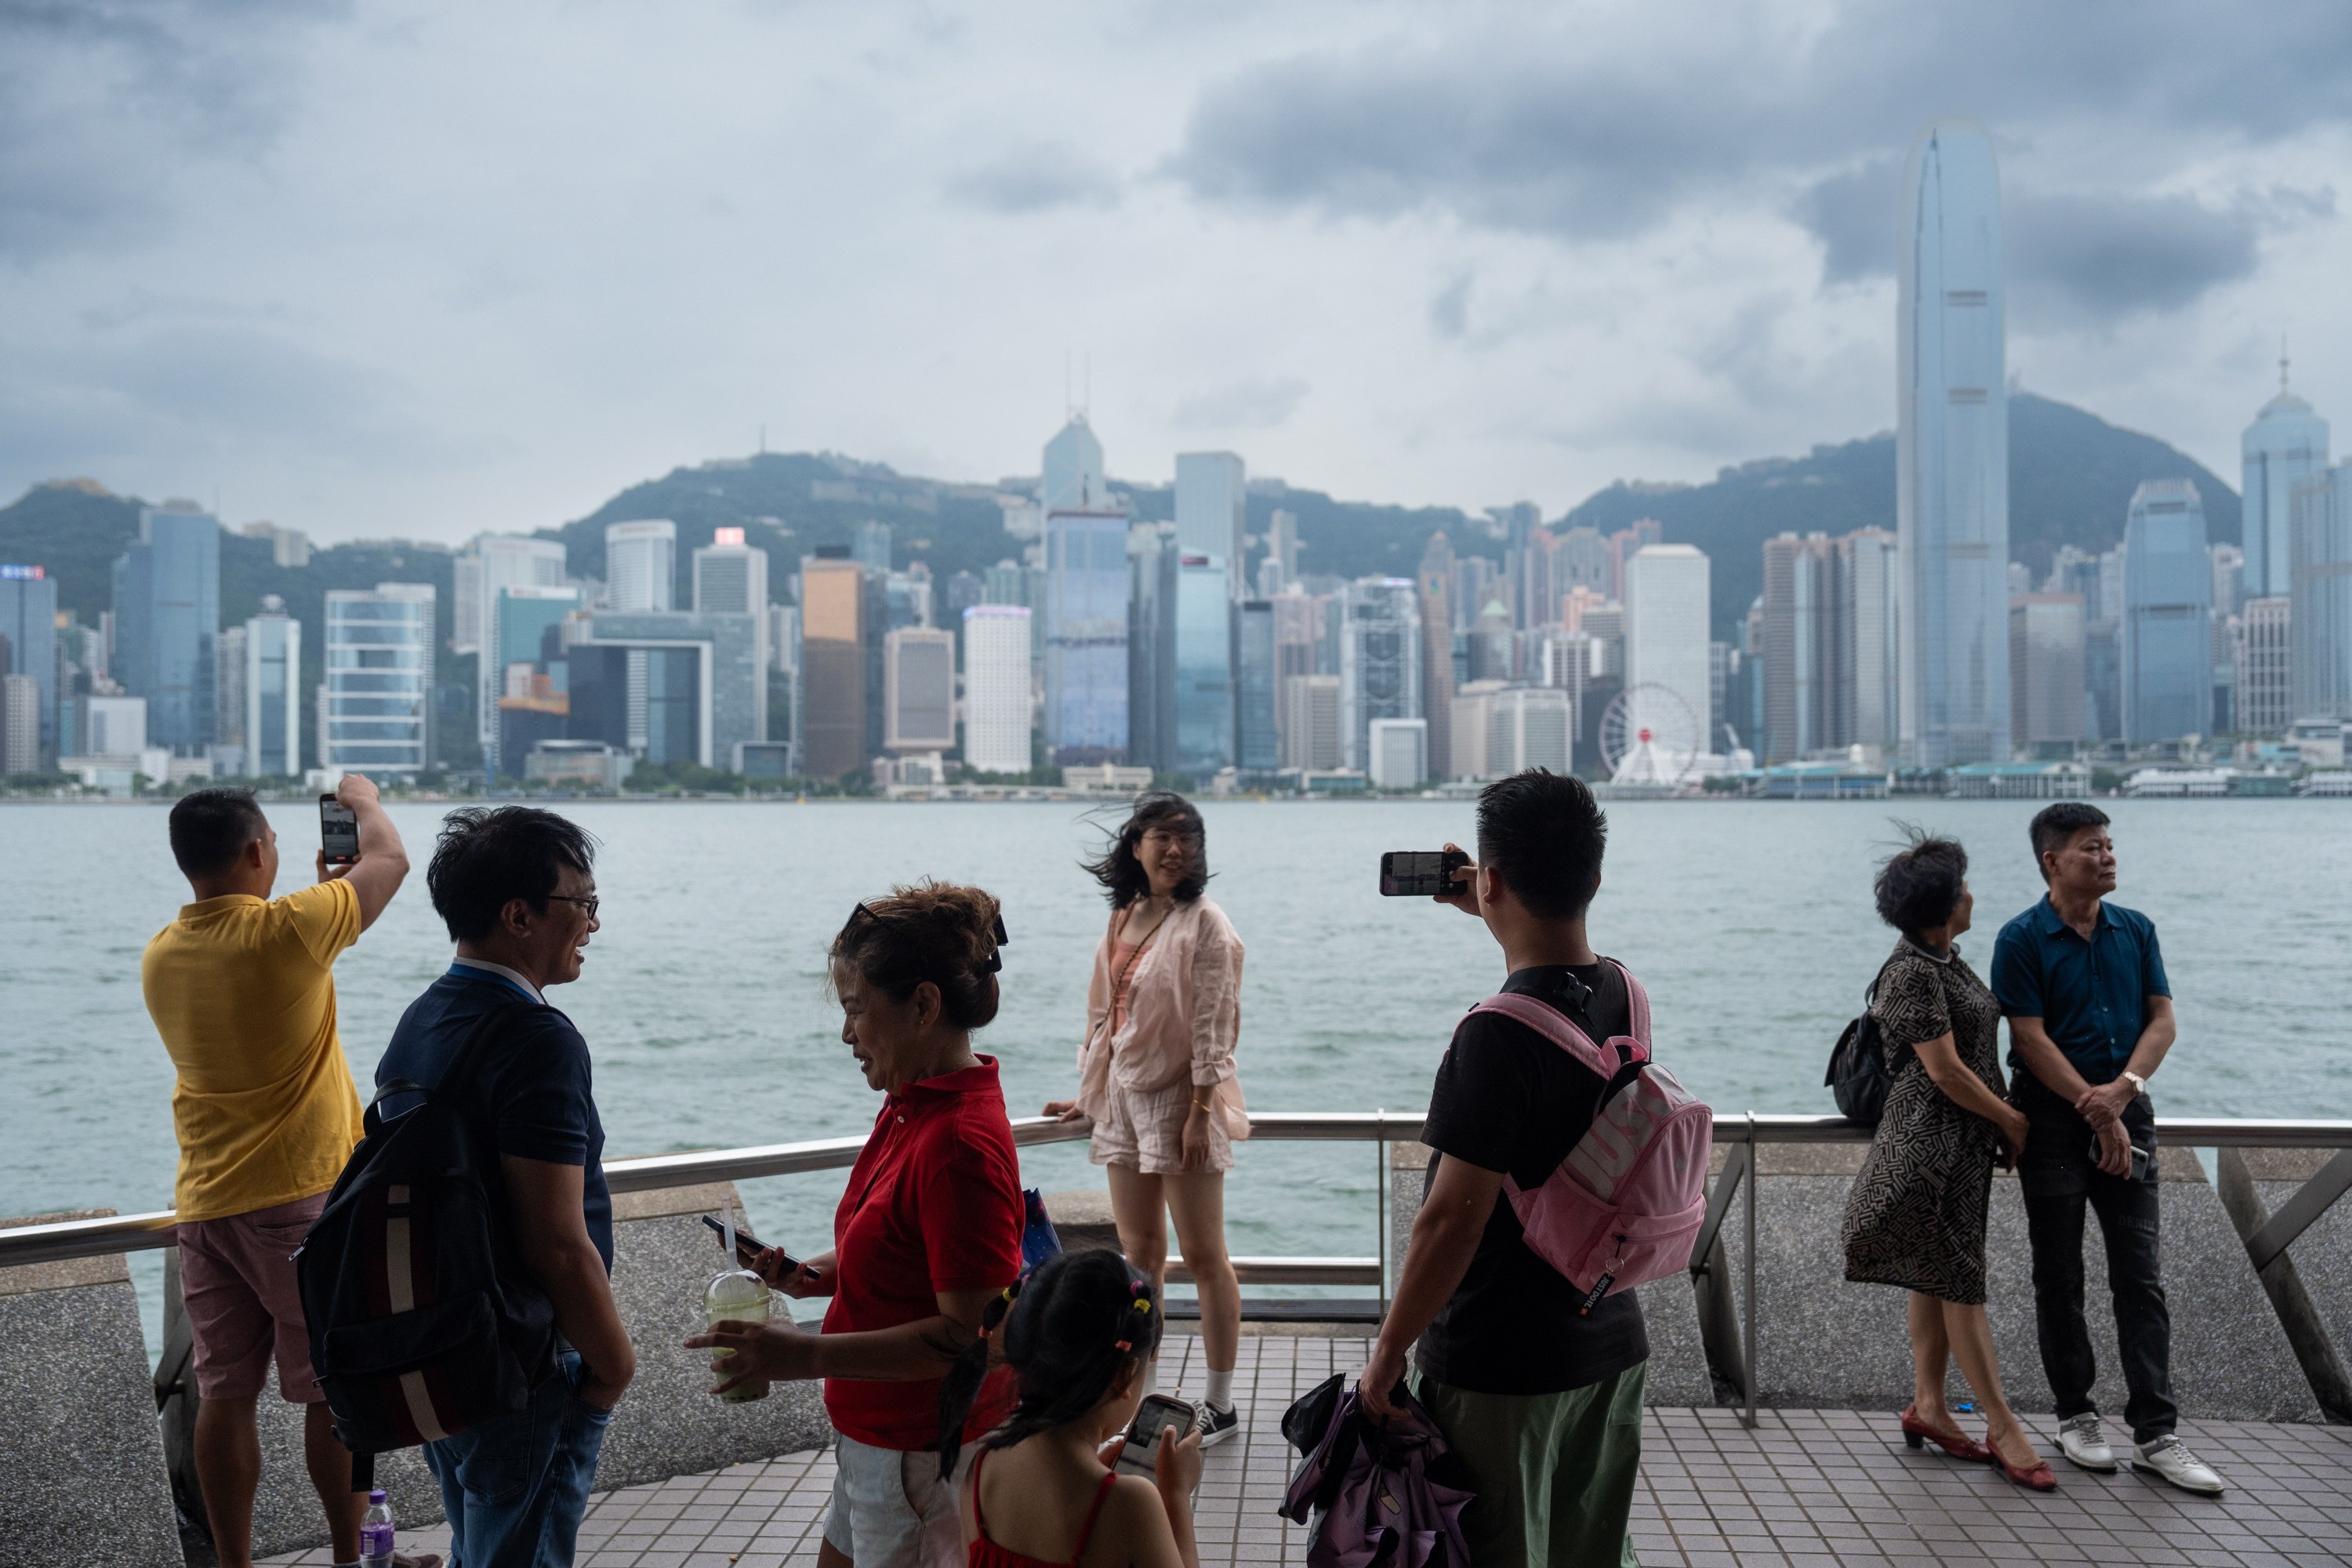 Tourists take photos in front of the Hong Kong island skyline during Typhoon Saola, on September 1. Photo: EPA-EFE